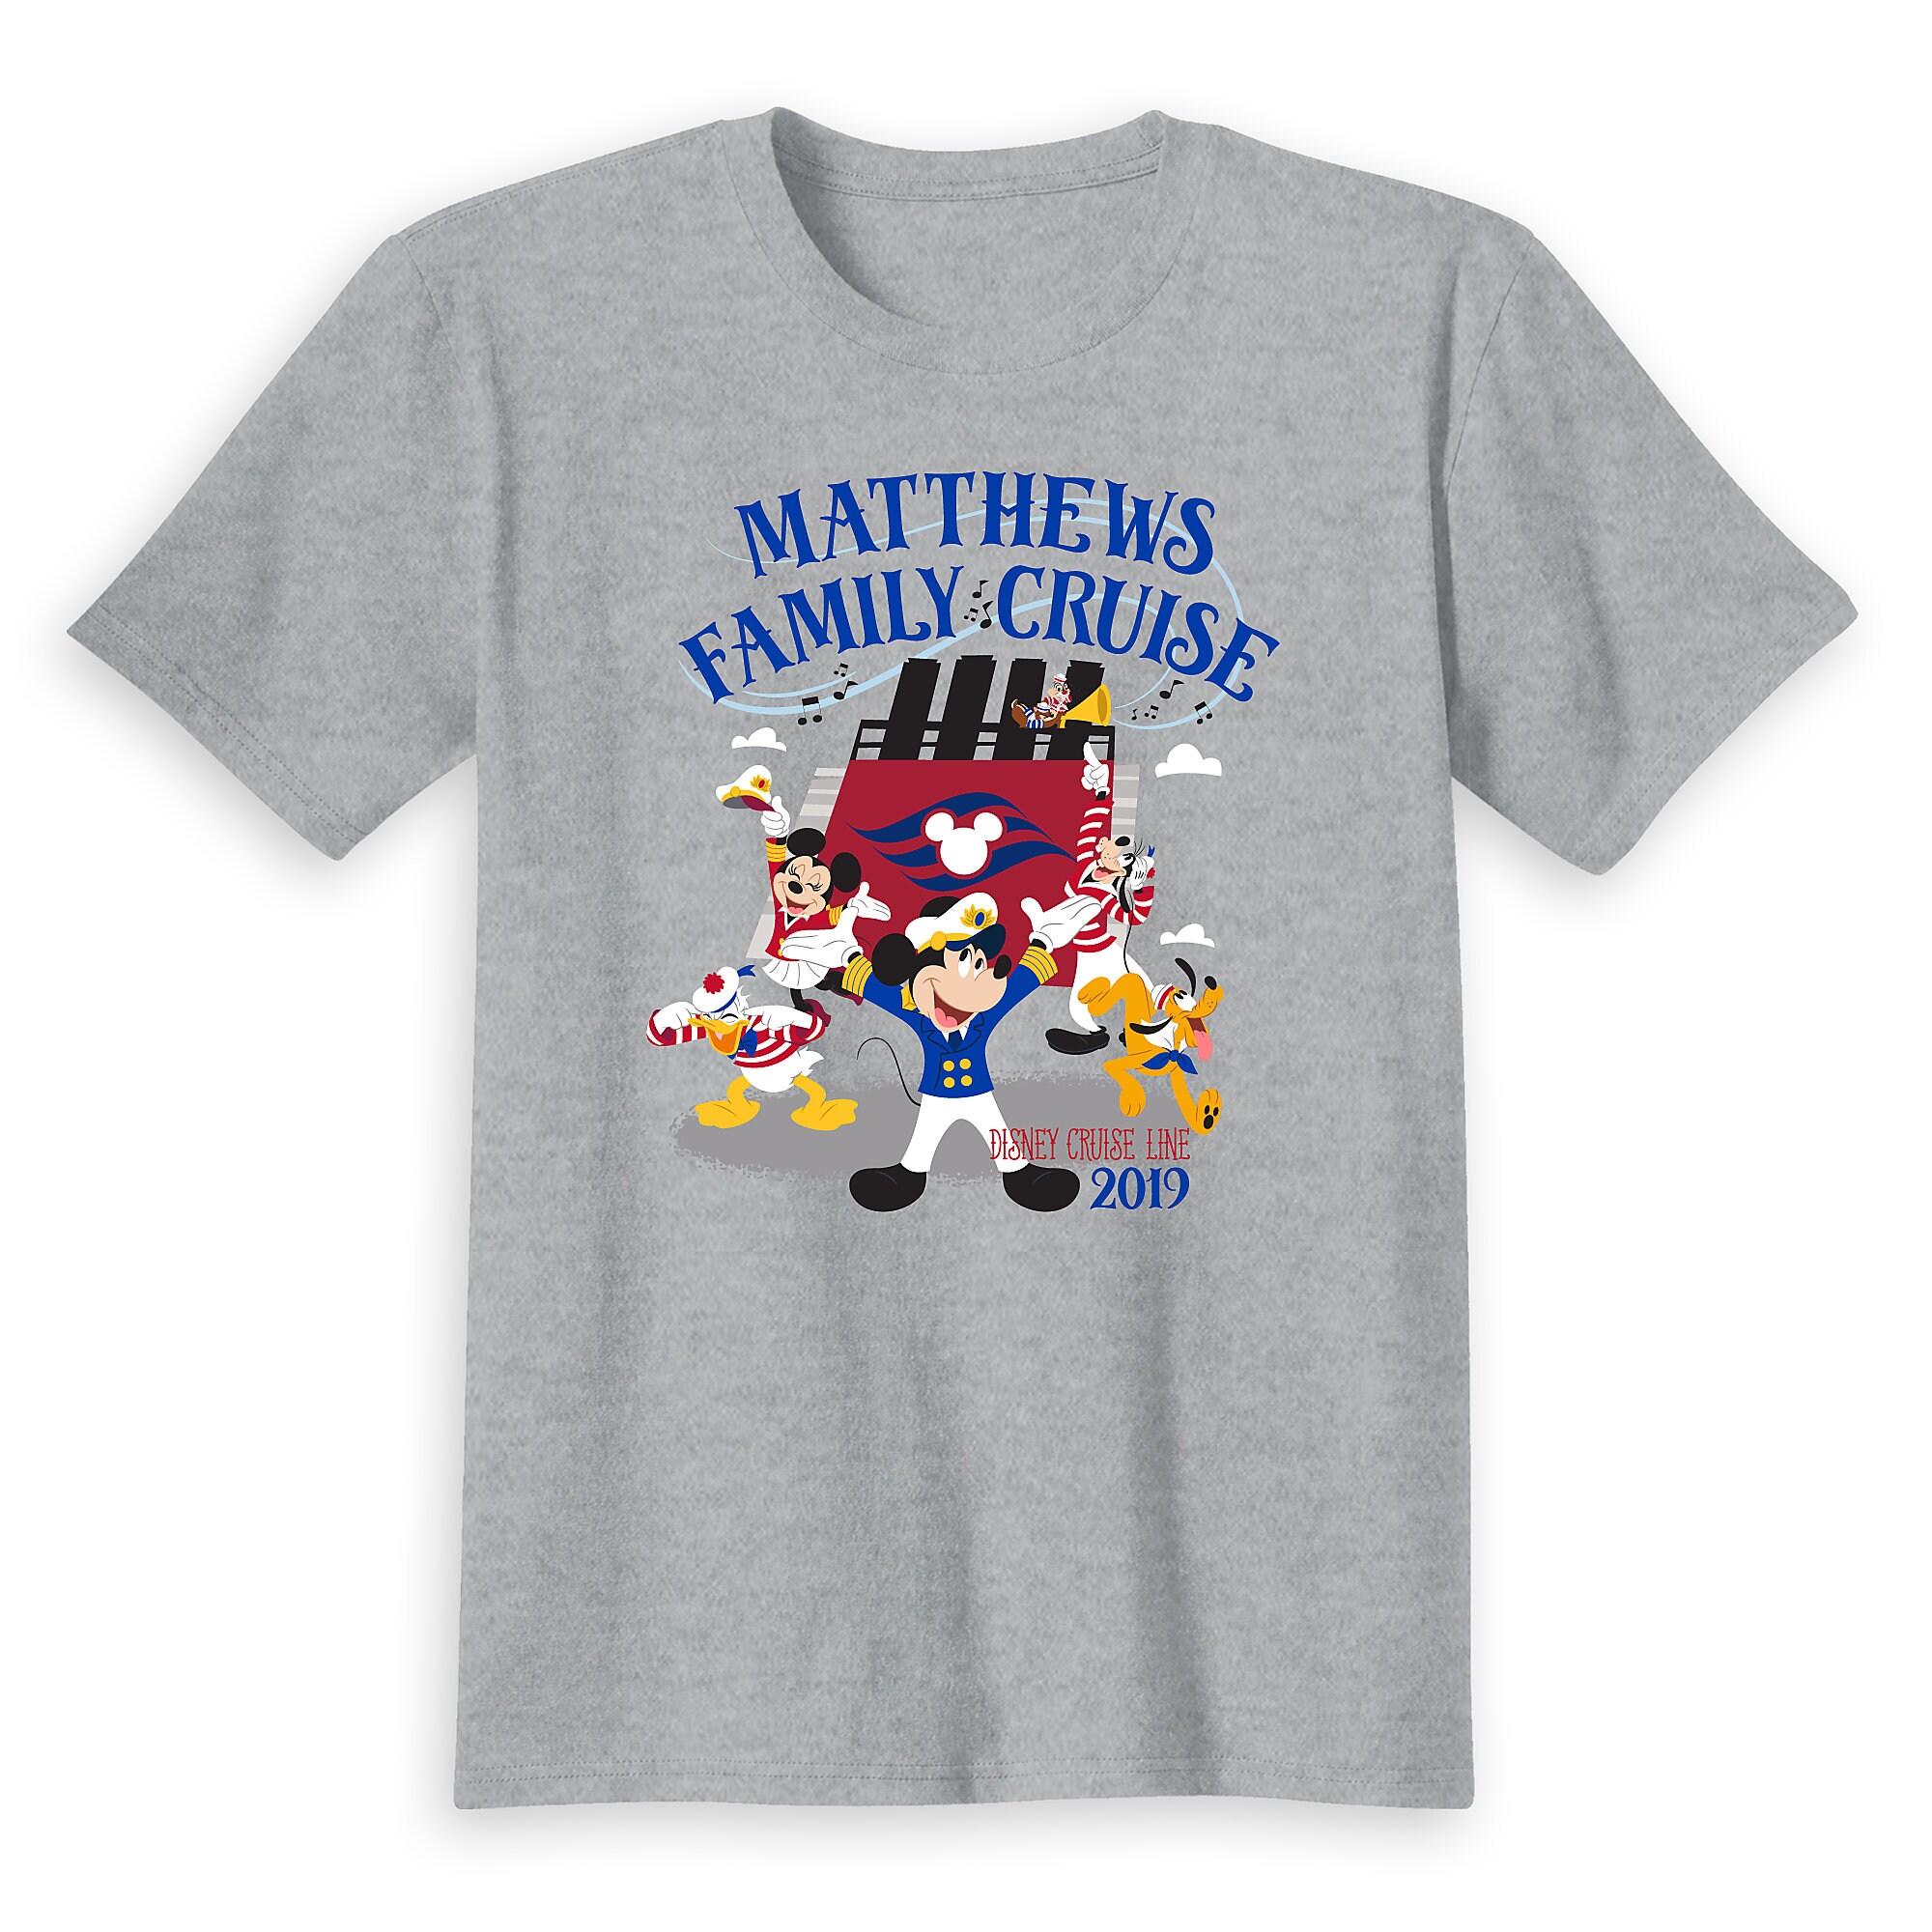 Kids' Captain Mickey Mouse and Crew Disney Cruise Line Family Cruise 2019 T-Shirt - Customized